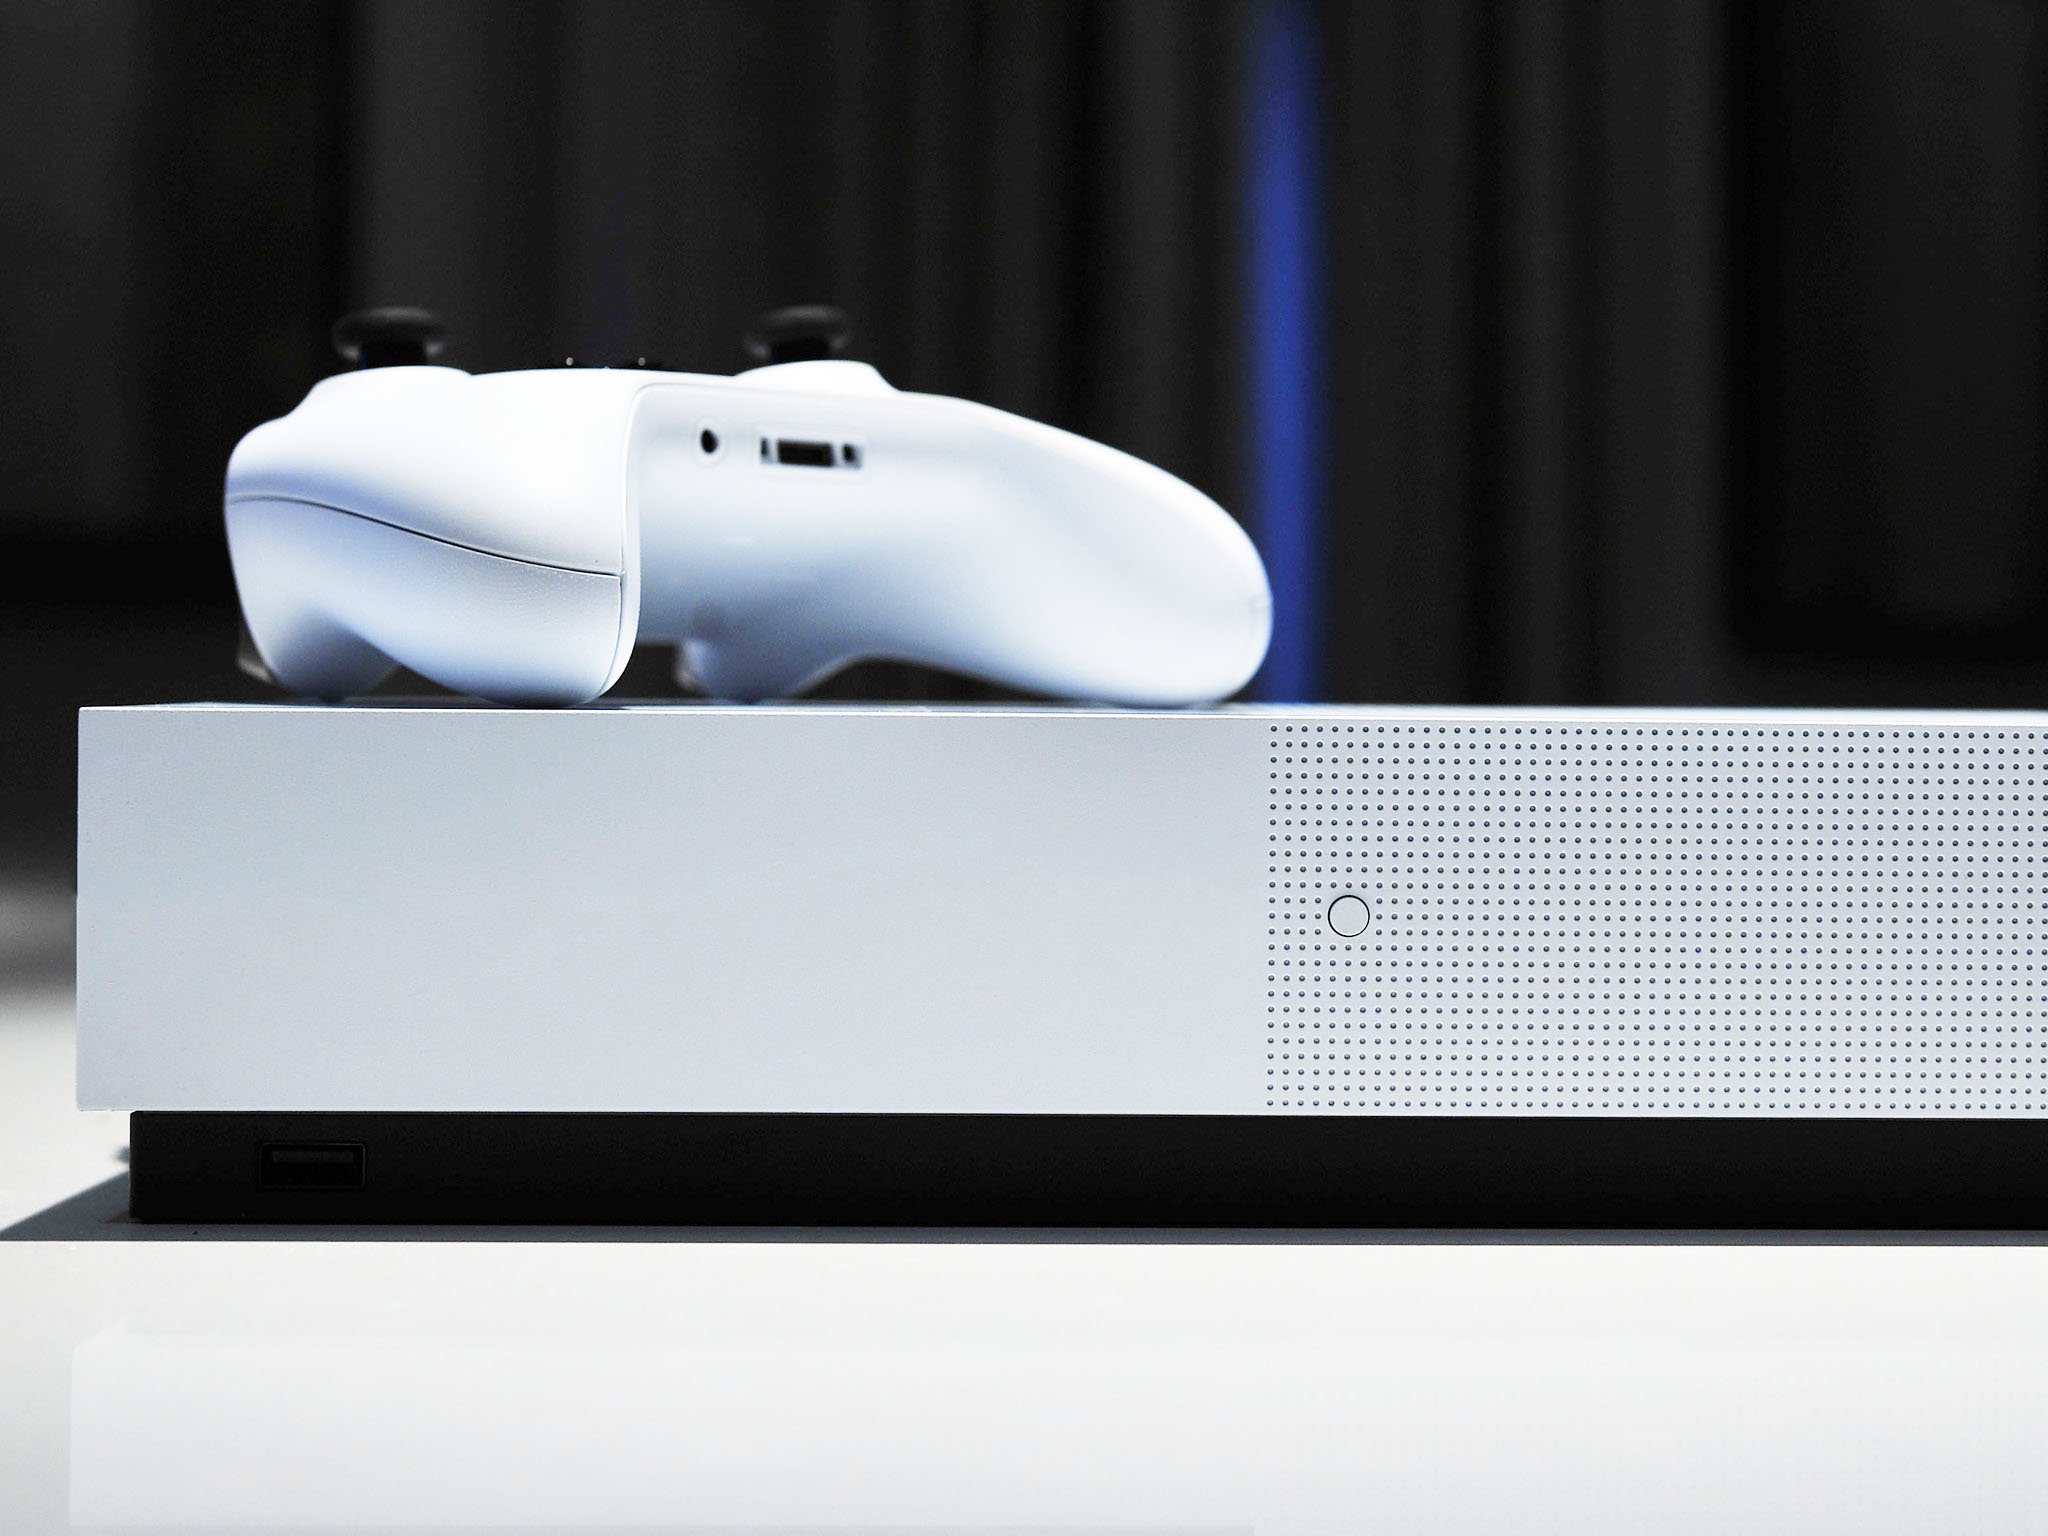 Xbox One S All Digital is basically just a One S with the drive